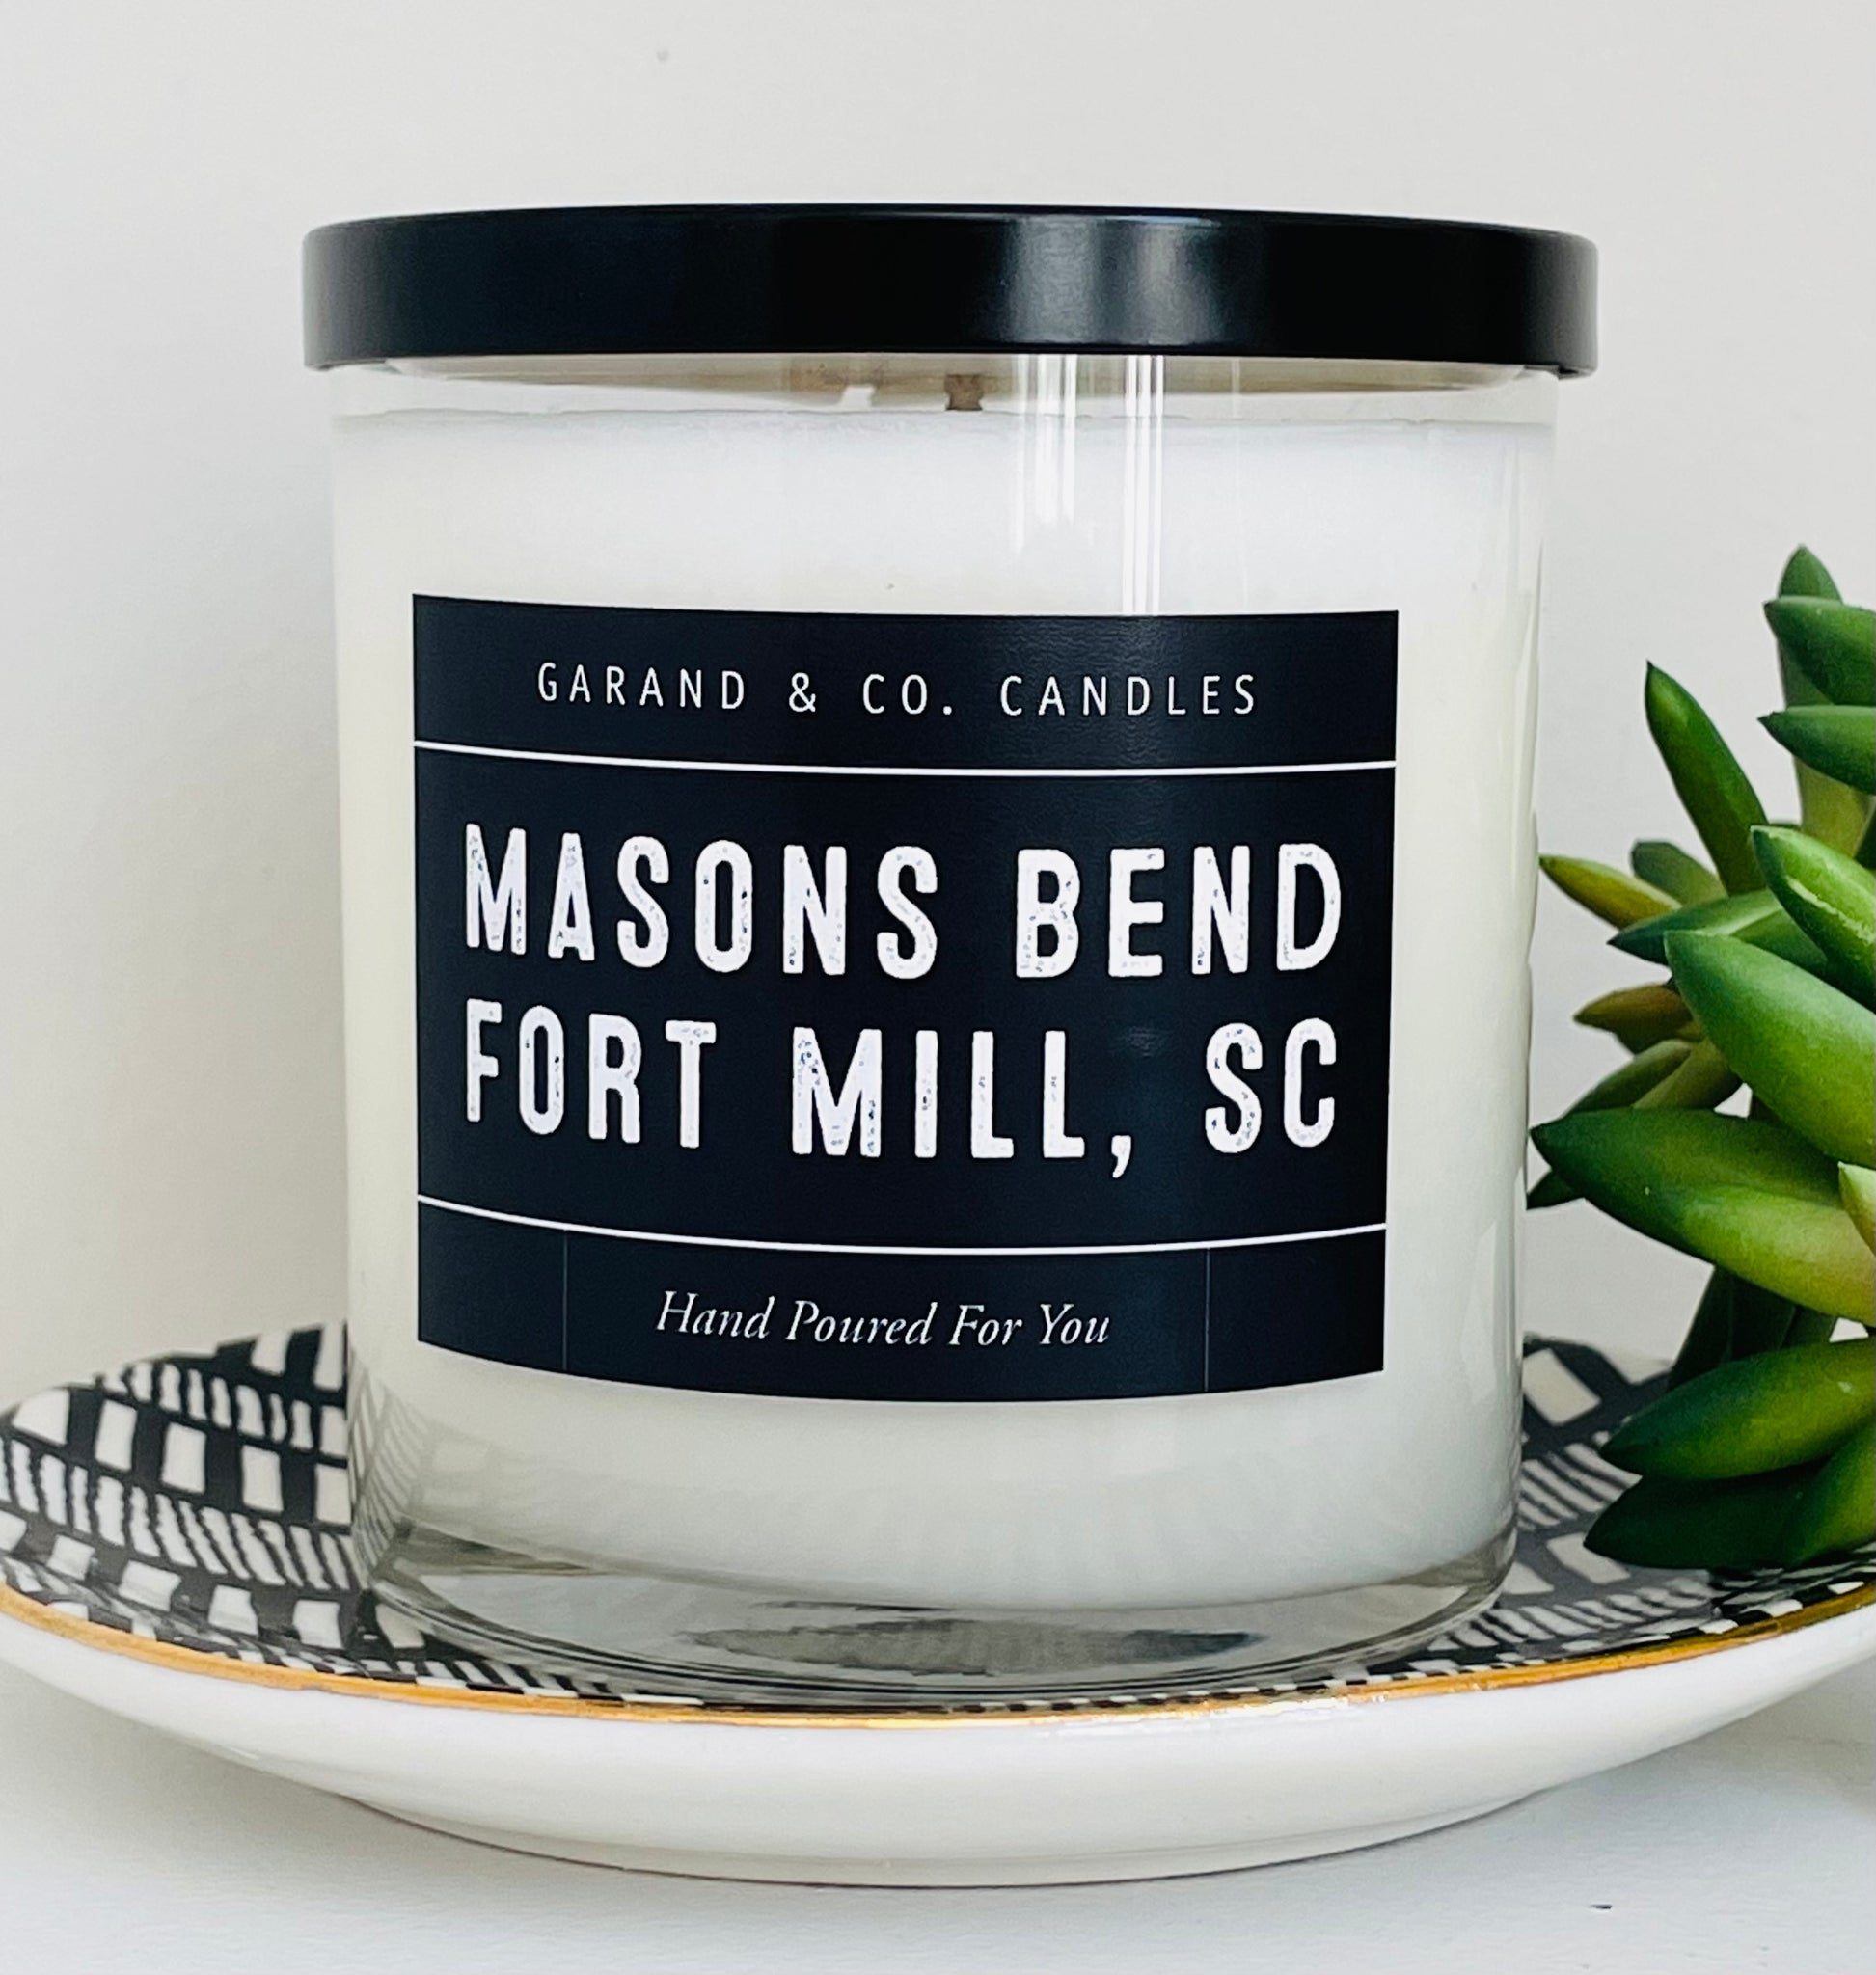 12 oz Clear Glass Jar Candle - Mason's Bend, Fort Mill, SC